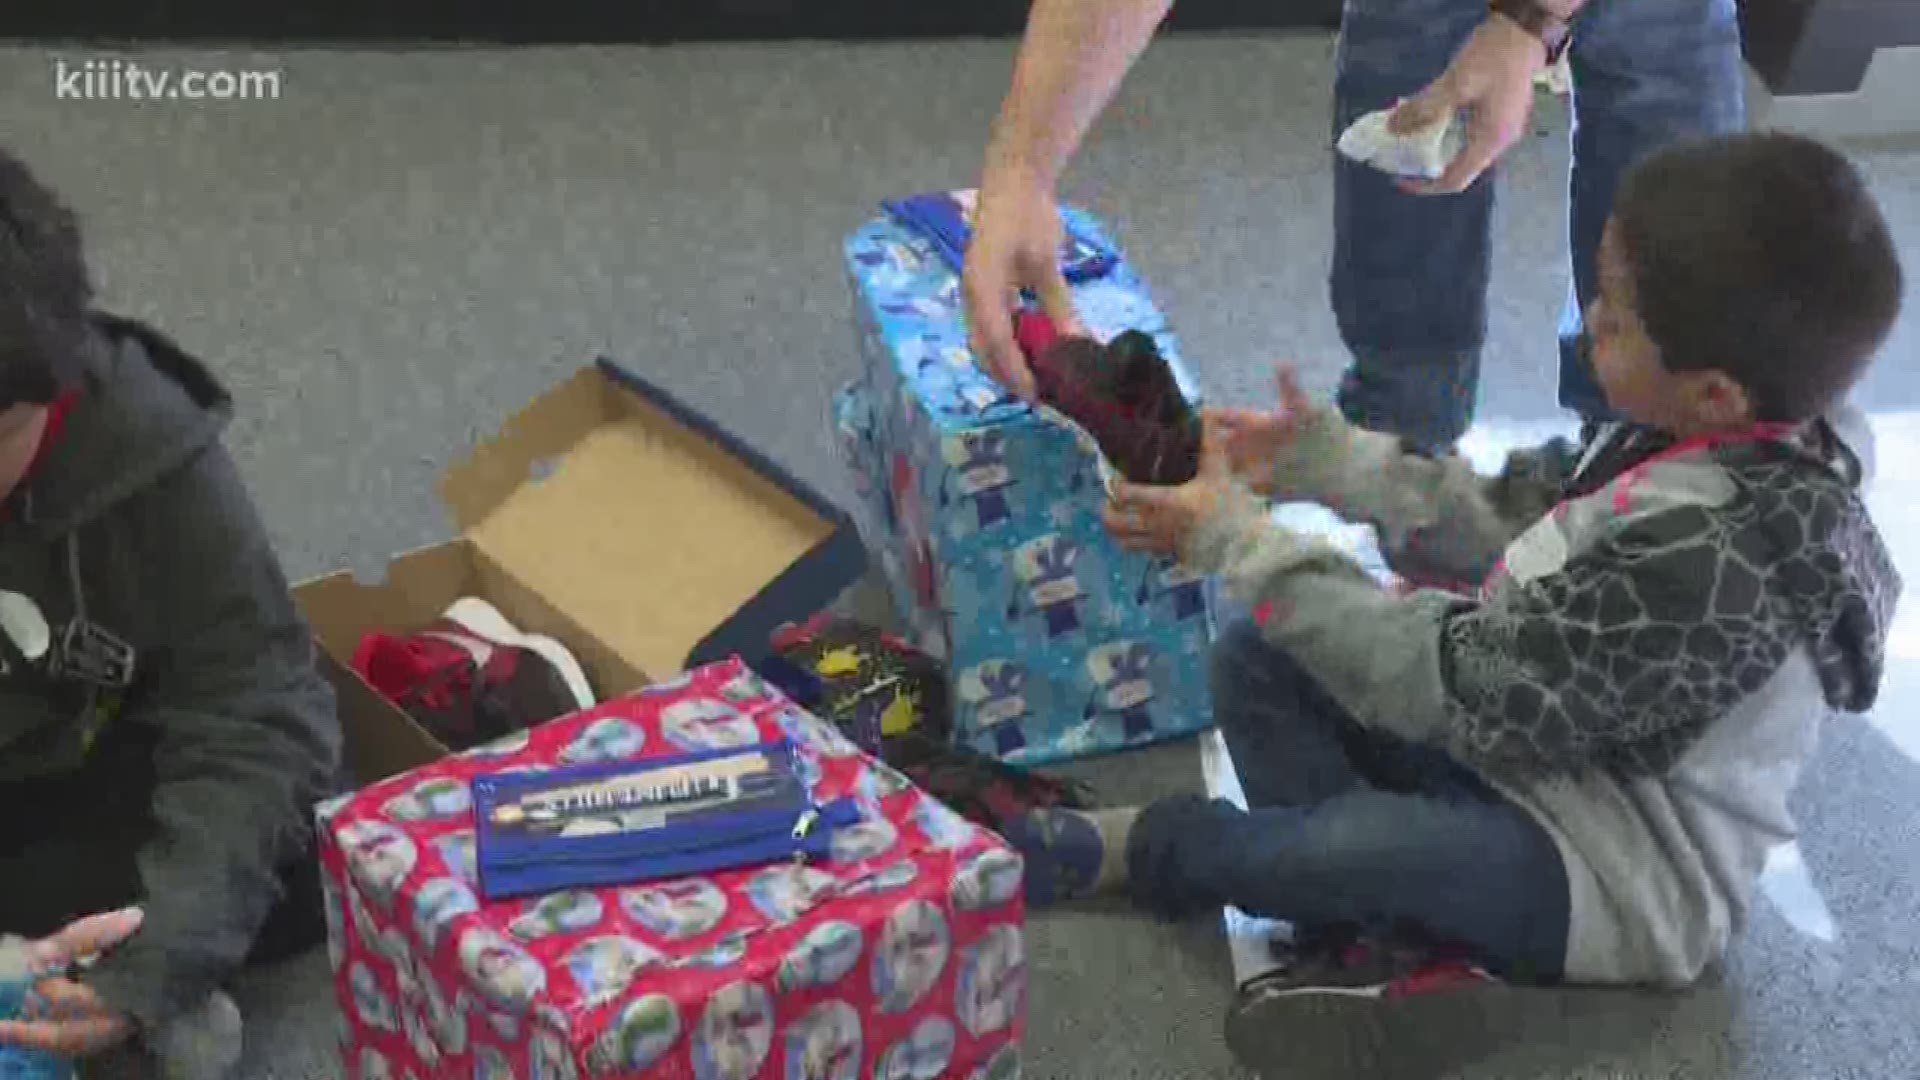 Students from three area schools got some new shoes and presents for Christmas on Friday thanks to Flint Hills Resources and the YMCA.